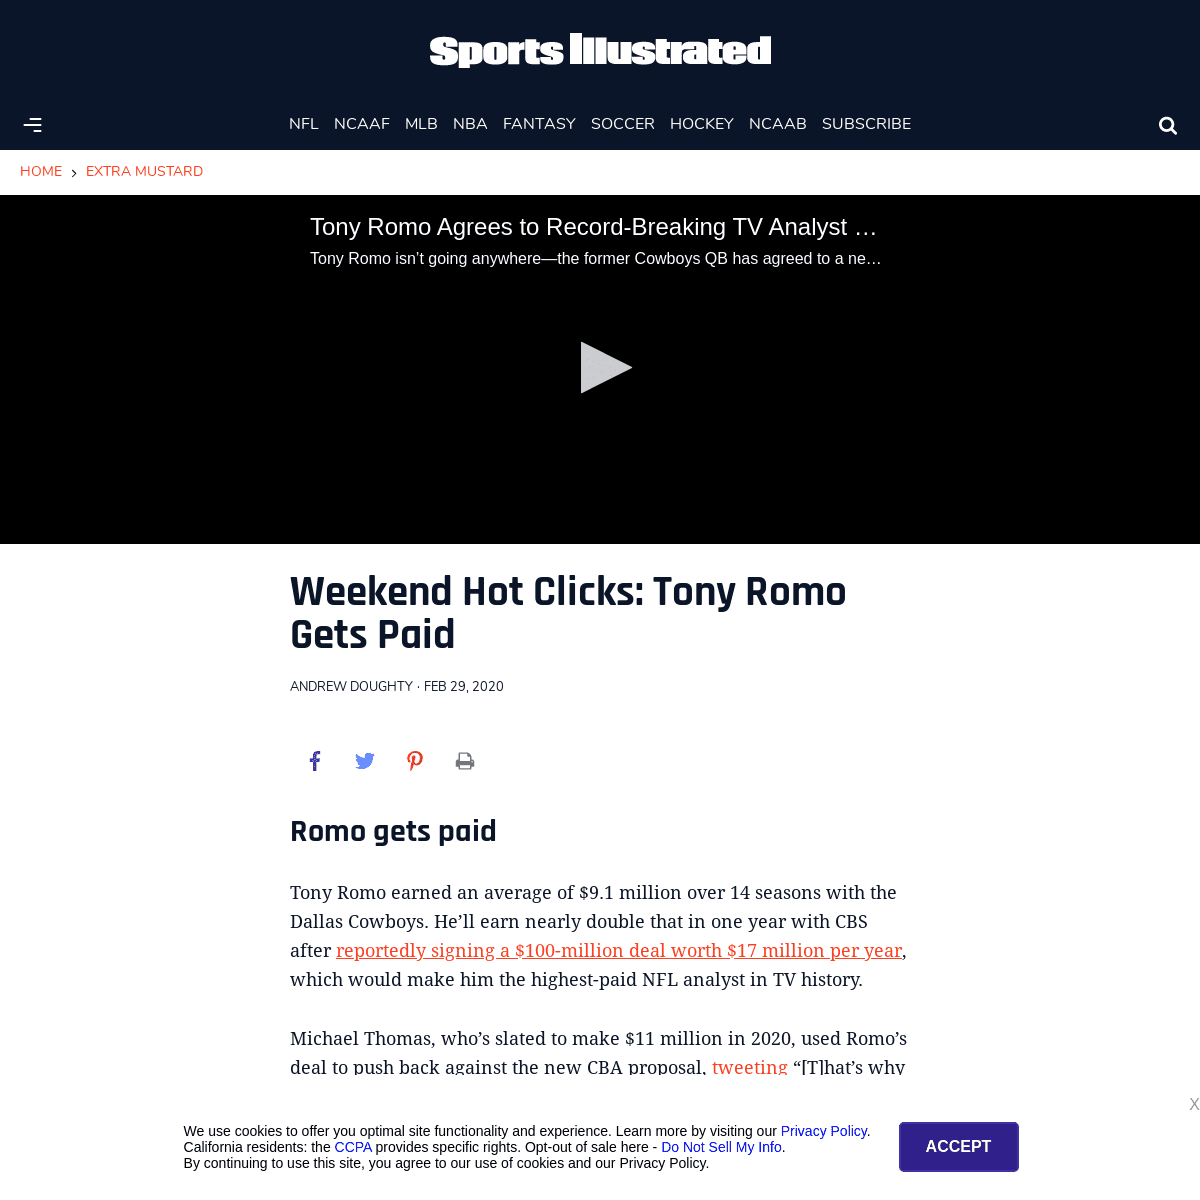 A complete backup of www.si.com/extra-mustard/2020/02/29/romo-cbs-contract-xlf-kickoff-rules-influence